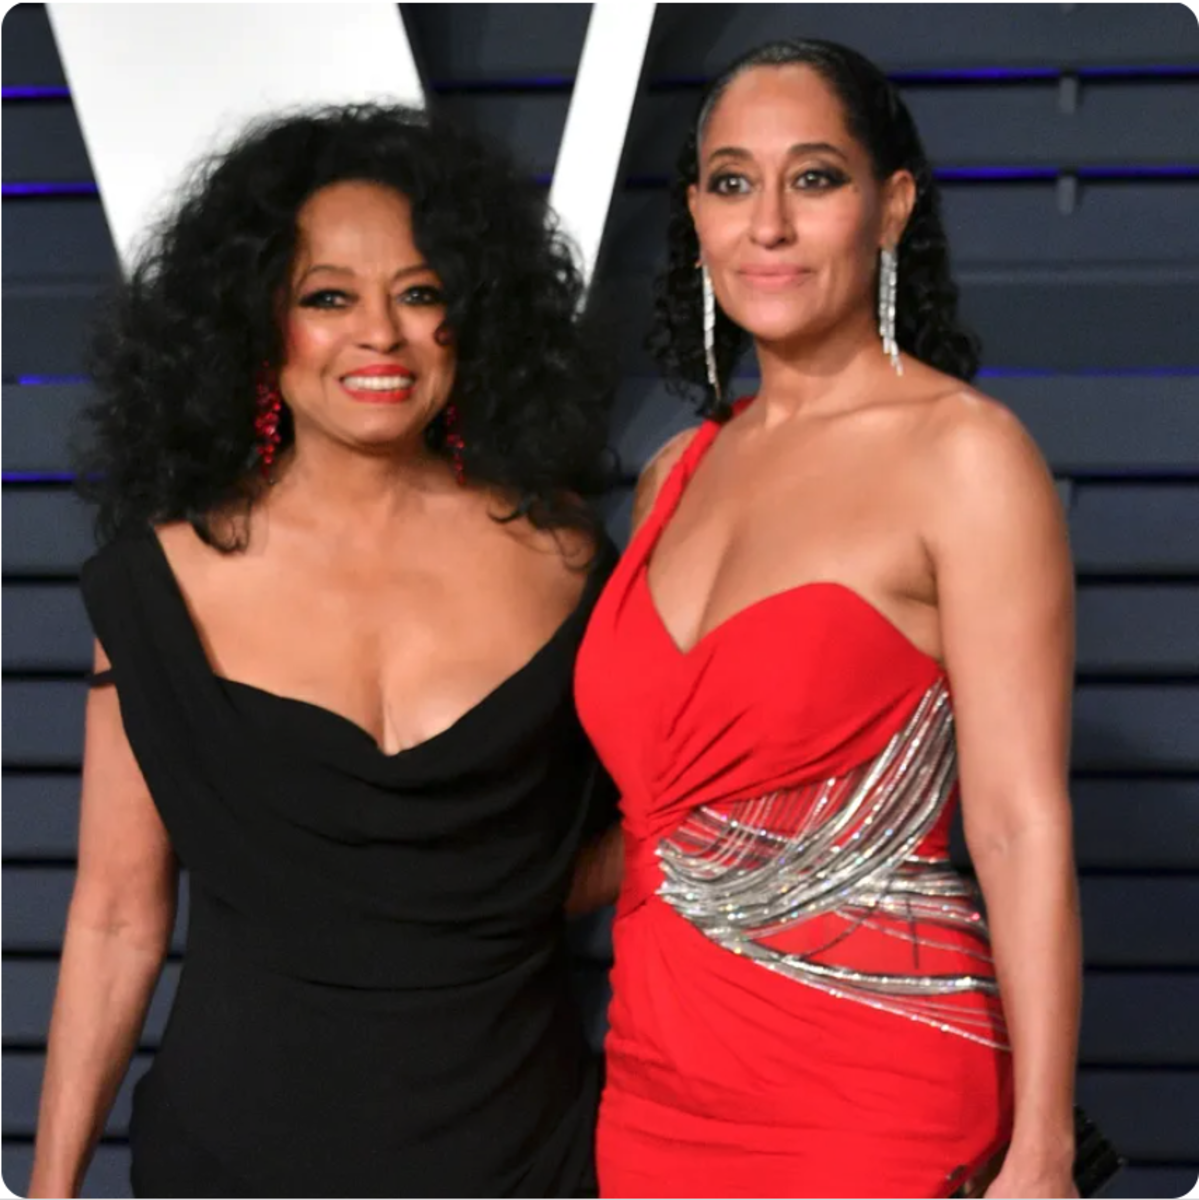 Singer Diana Ross (left) and daughter Tracee Ellis Ross (right), a black Jewish American actress and model